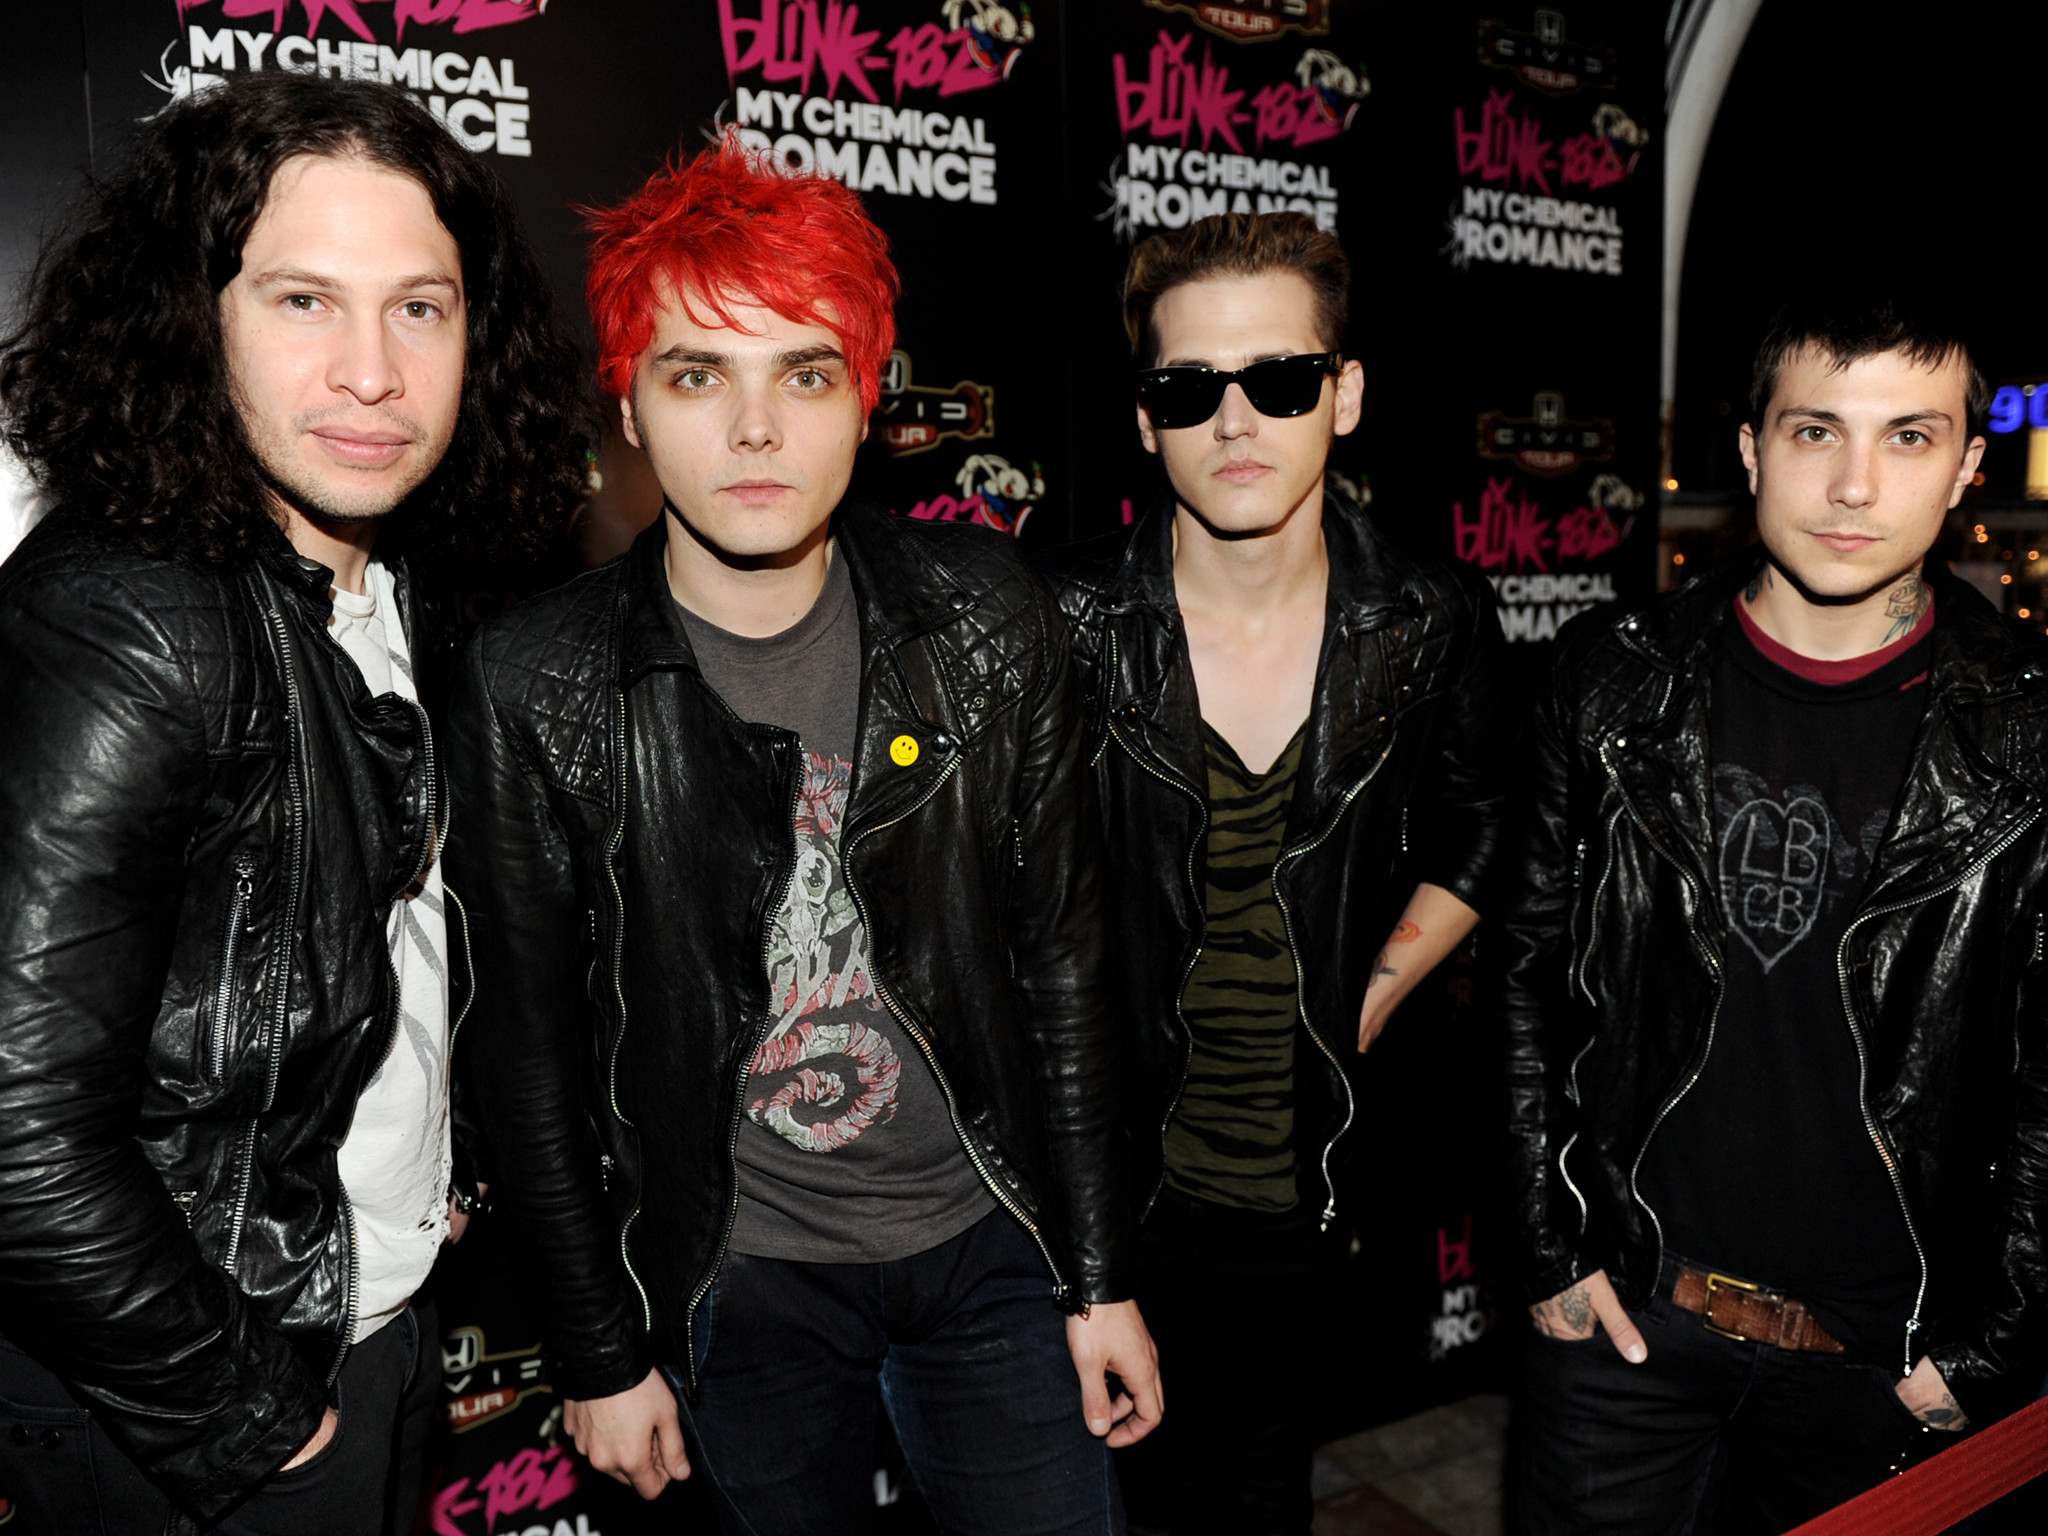 2048x1536 My Chemical Romance wallpapers